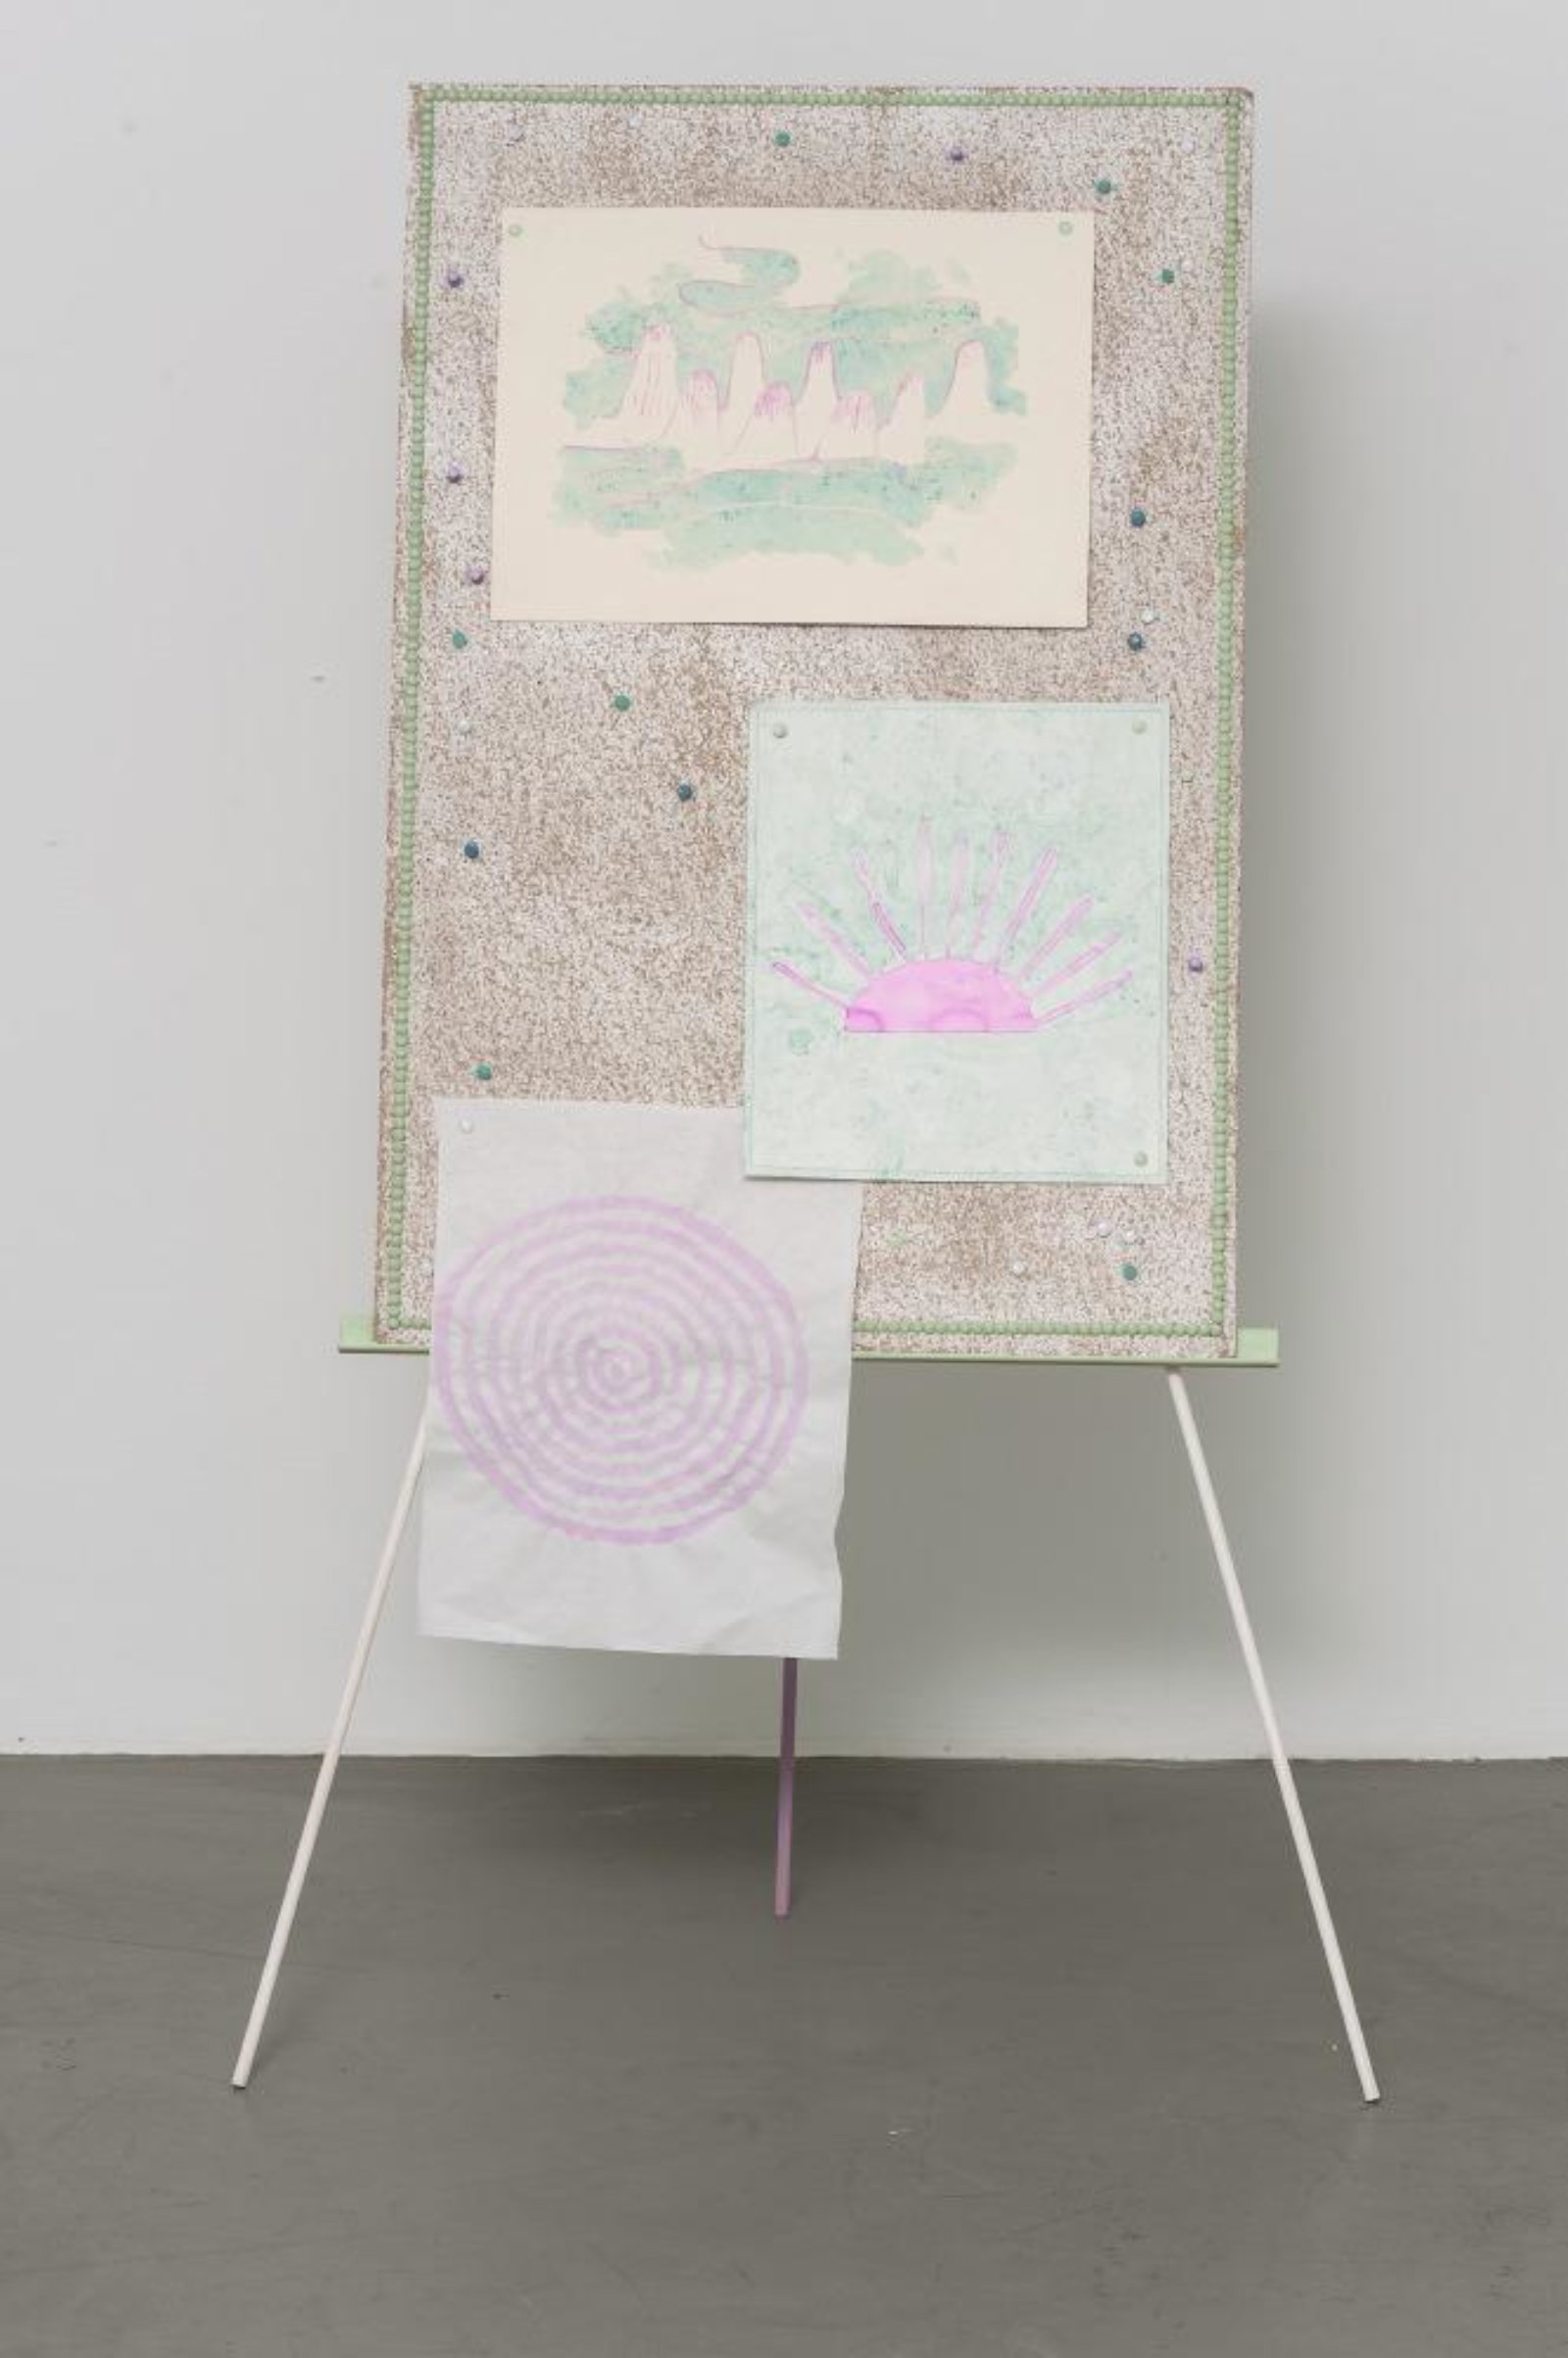 Ashes Withyman, Radial Maze (Sunrise), Mountains (After Louise Bourgeois), 2014, rat poison, paper, pins, wood, trim, wood, 53 x 31 x 20 in. (135 x 79 x 50 cm)